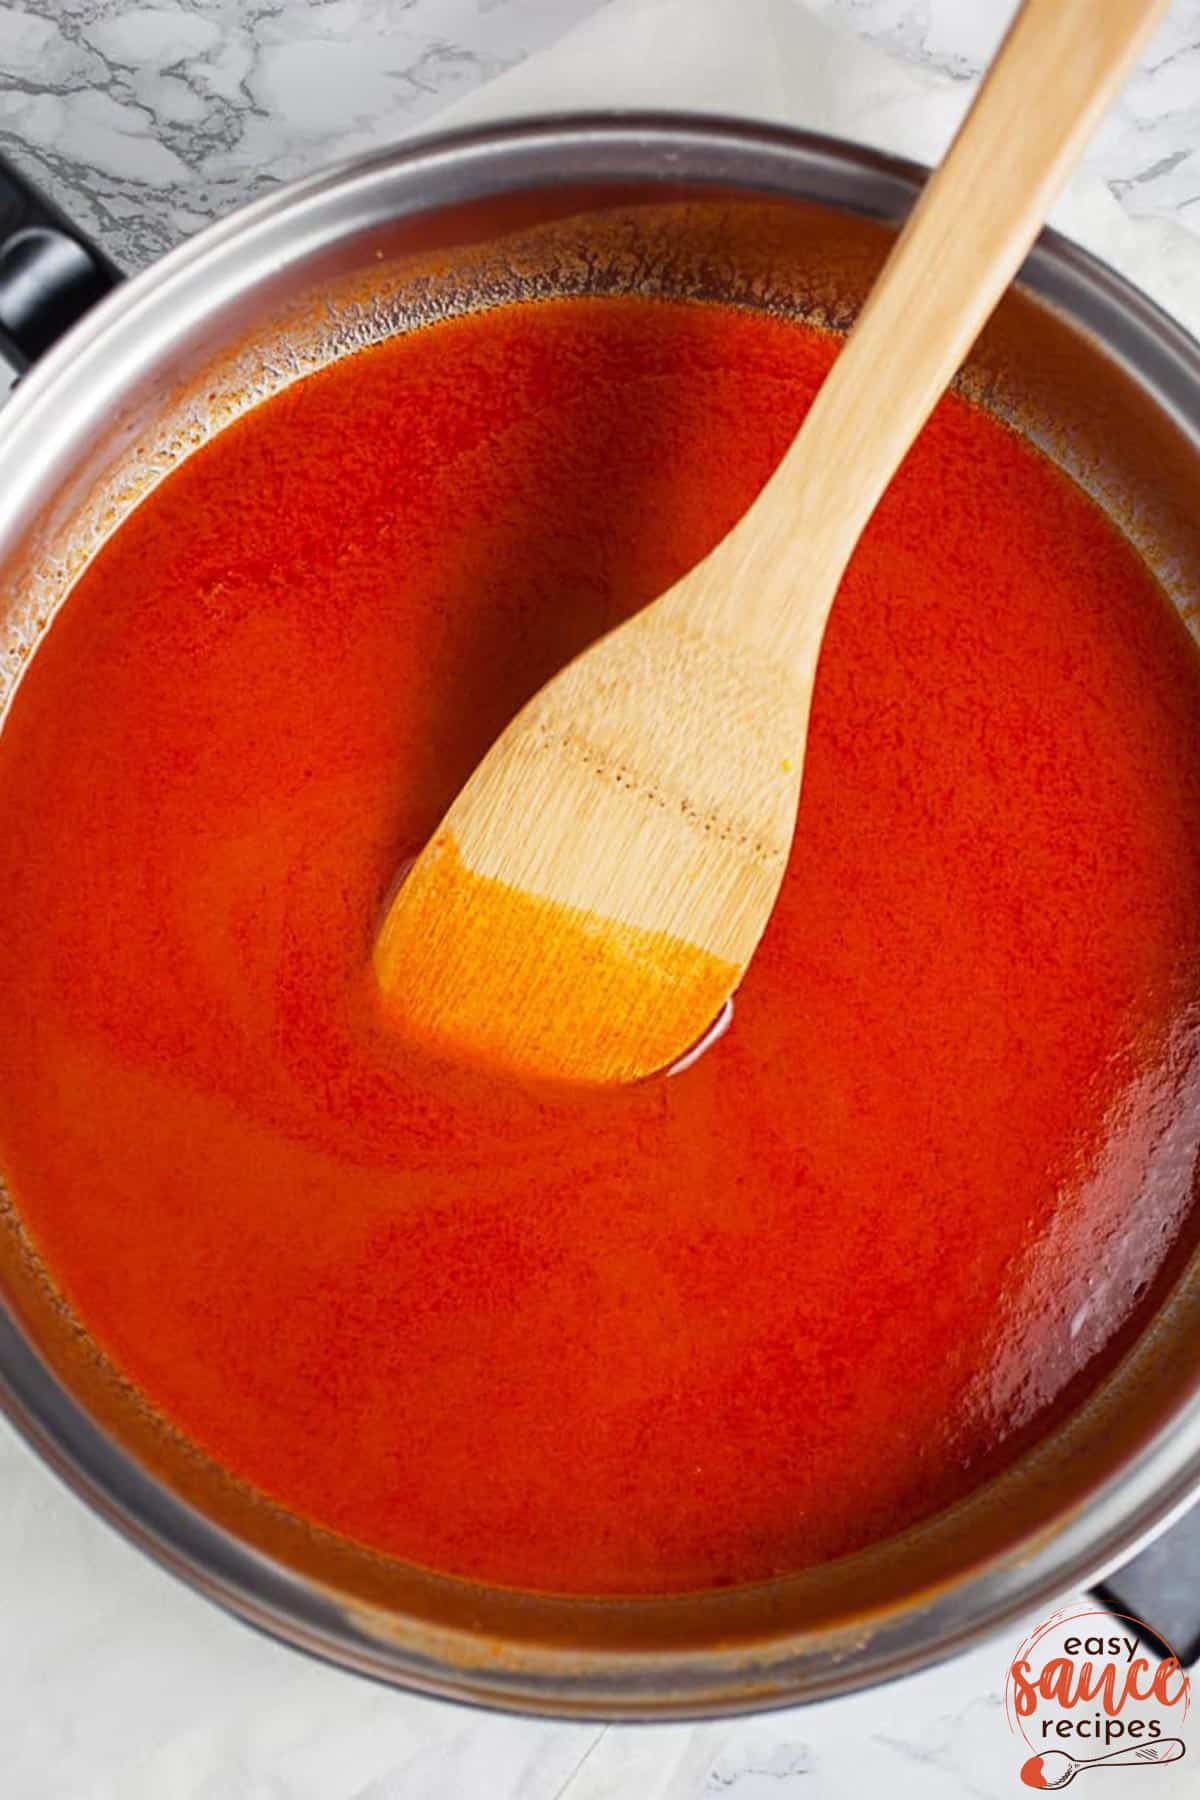 Hot sauce added to skillet